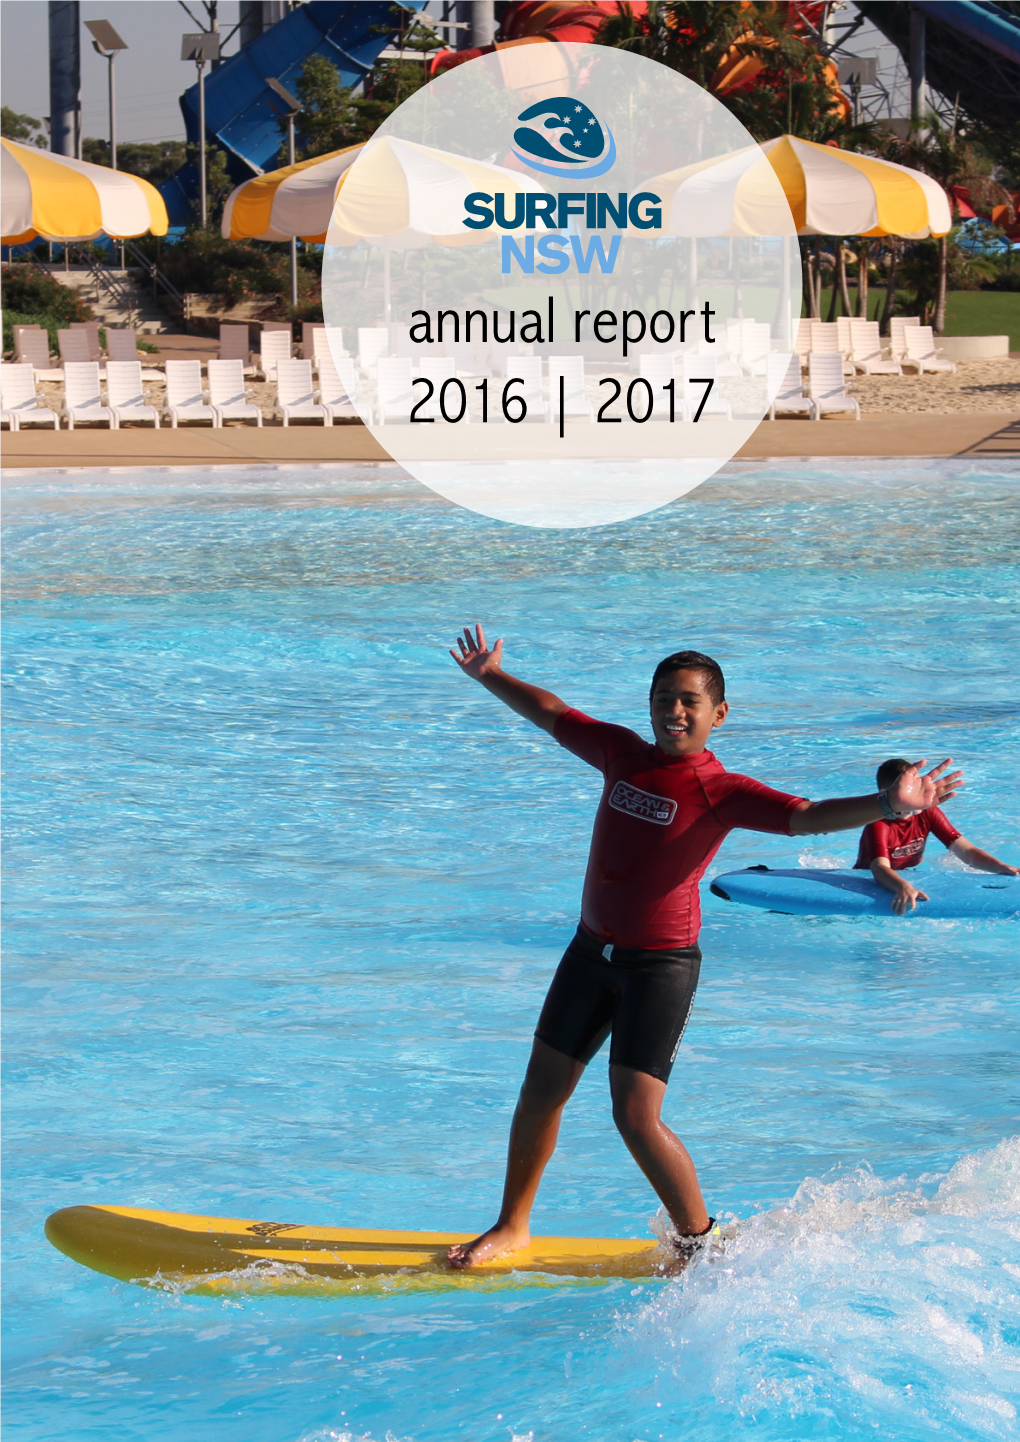 Annual Report 2016 | 2017 Surfing NSW, Established in 1963, Is the Largest and Longest Running of the Recognised State Bodies for the Sport of Surfing in Australia